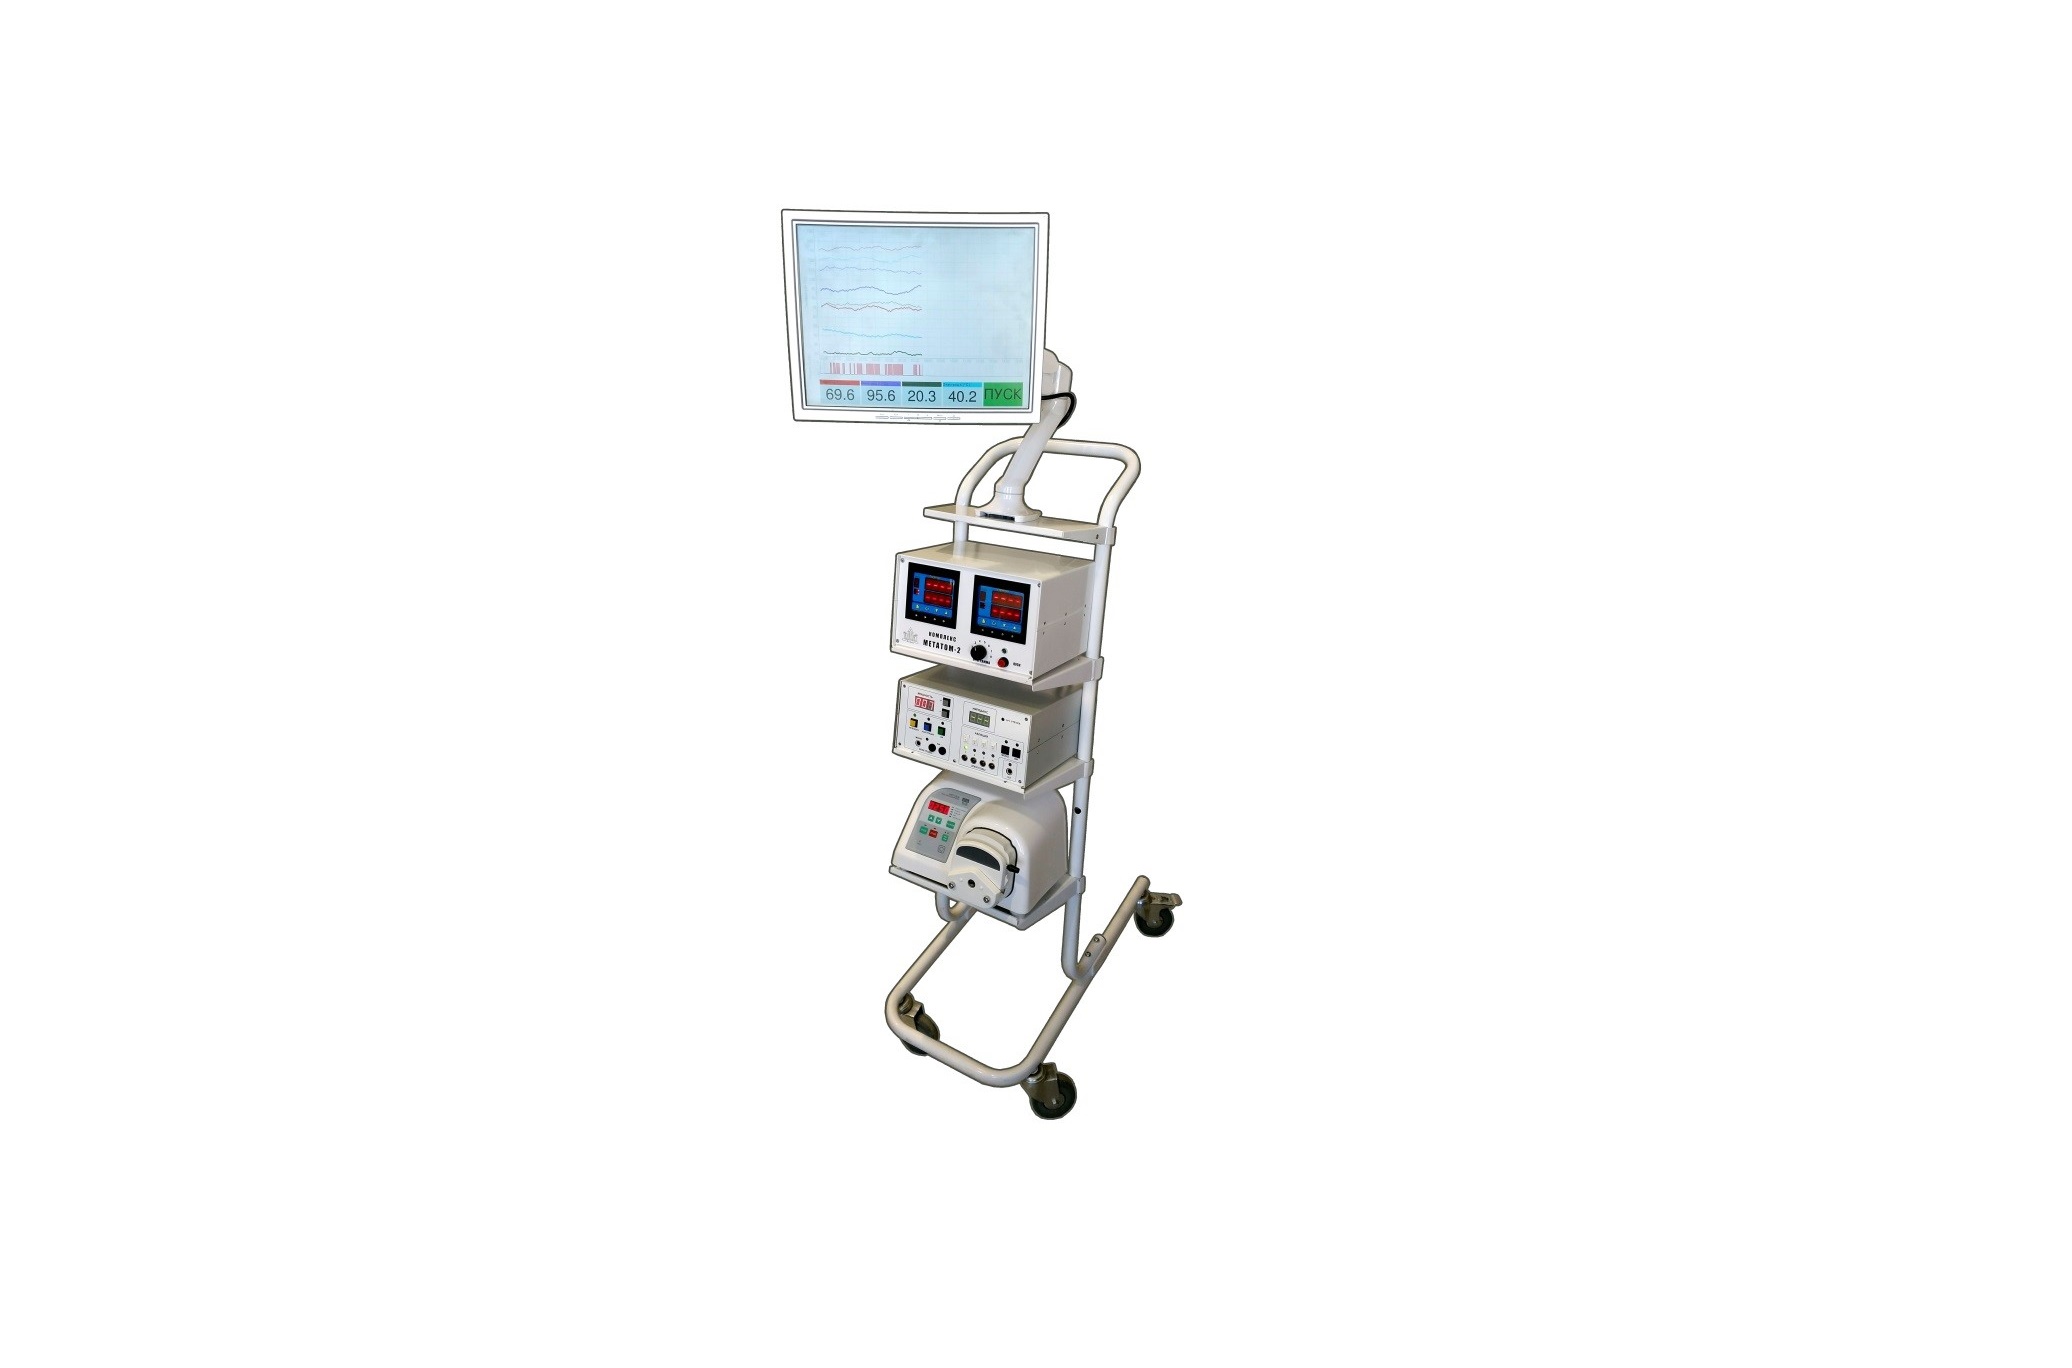 The device for ablation of tumors METATOM-2